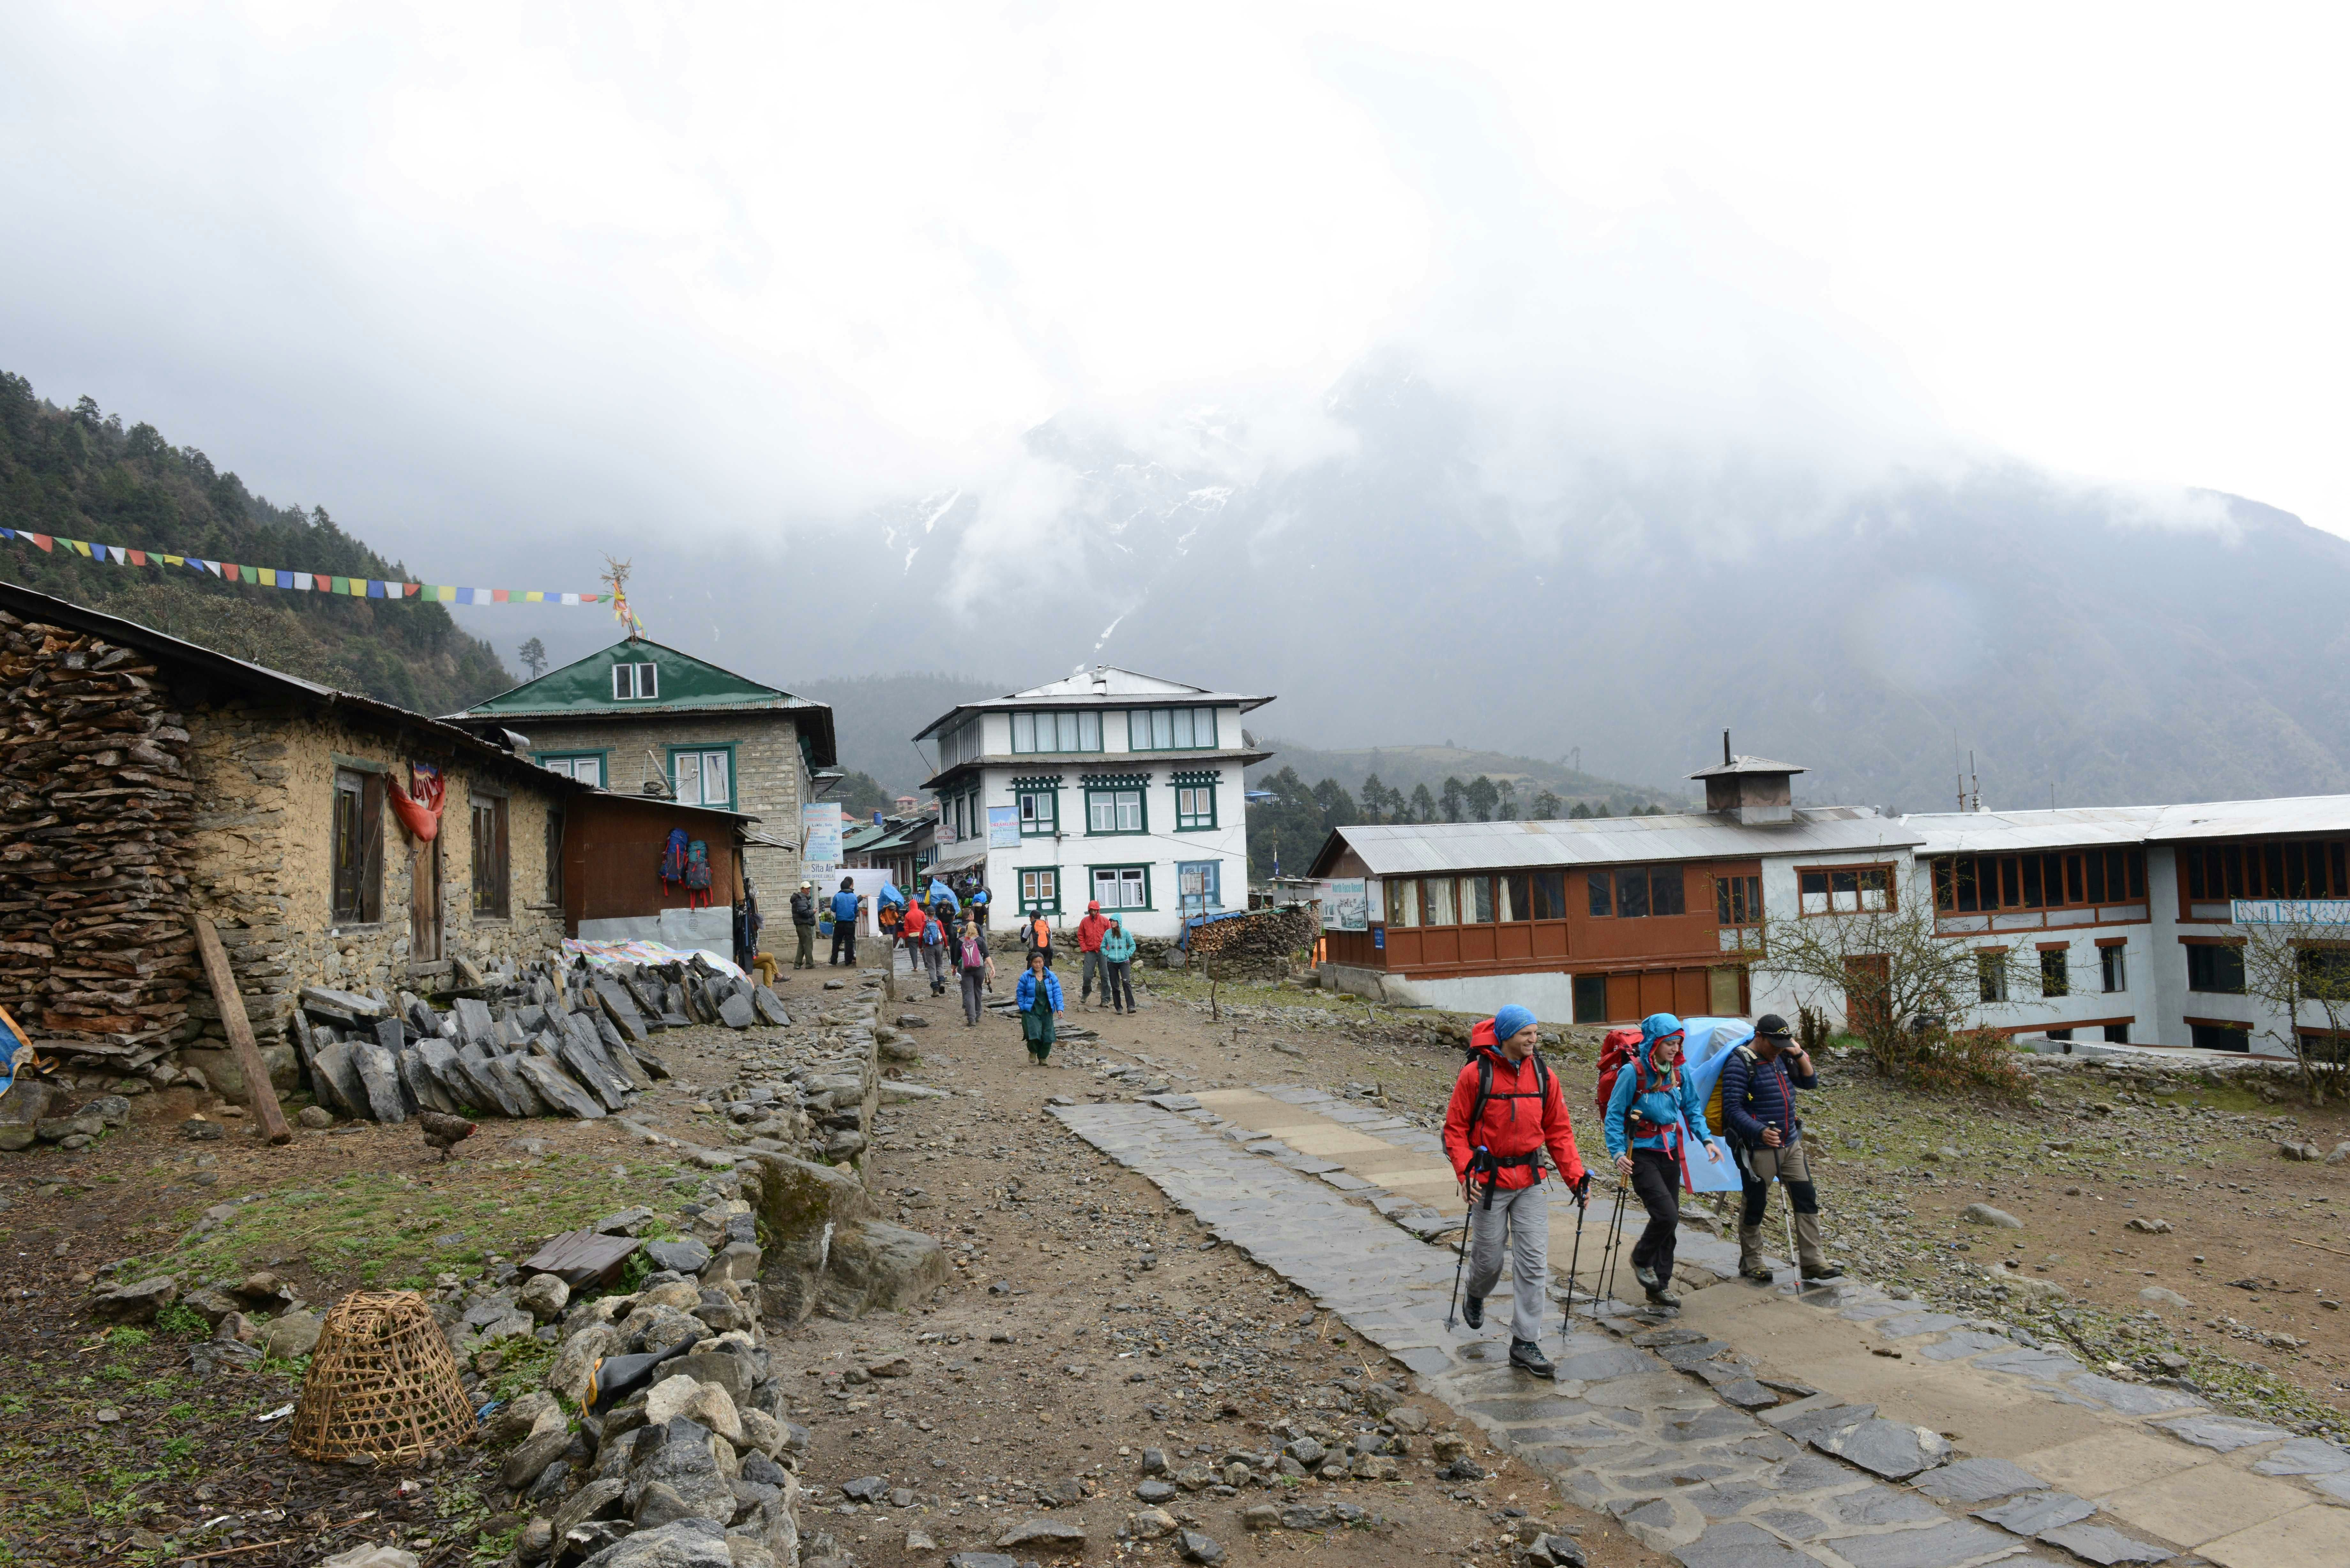 Hikers depart from the town of Lulka, Tibet with trekking poles in hand on a cobbled street